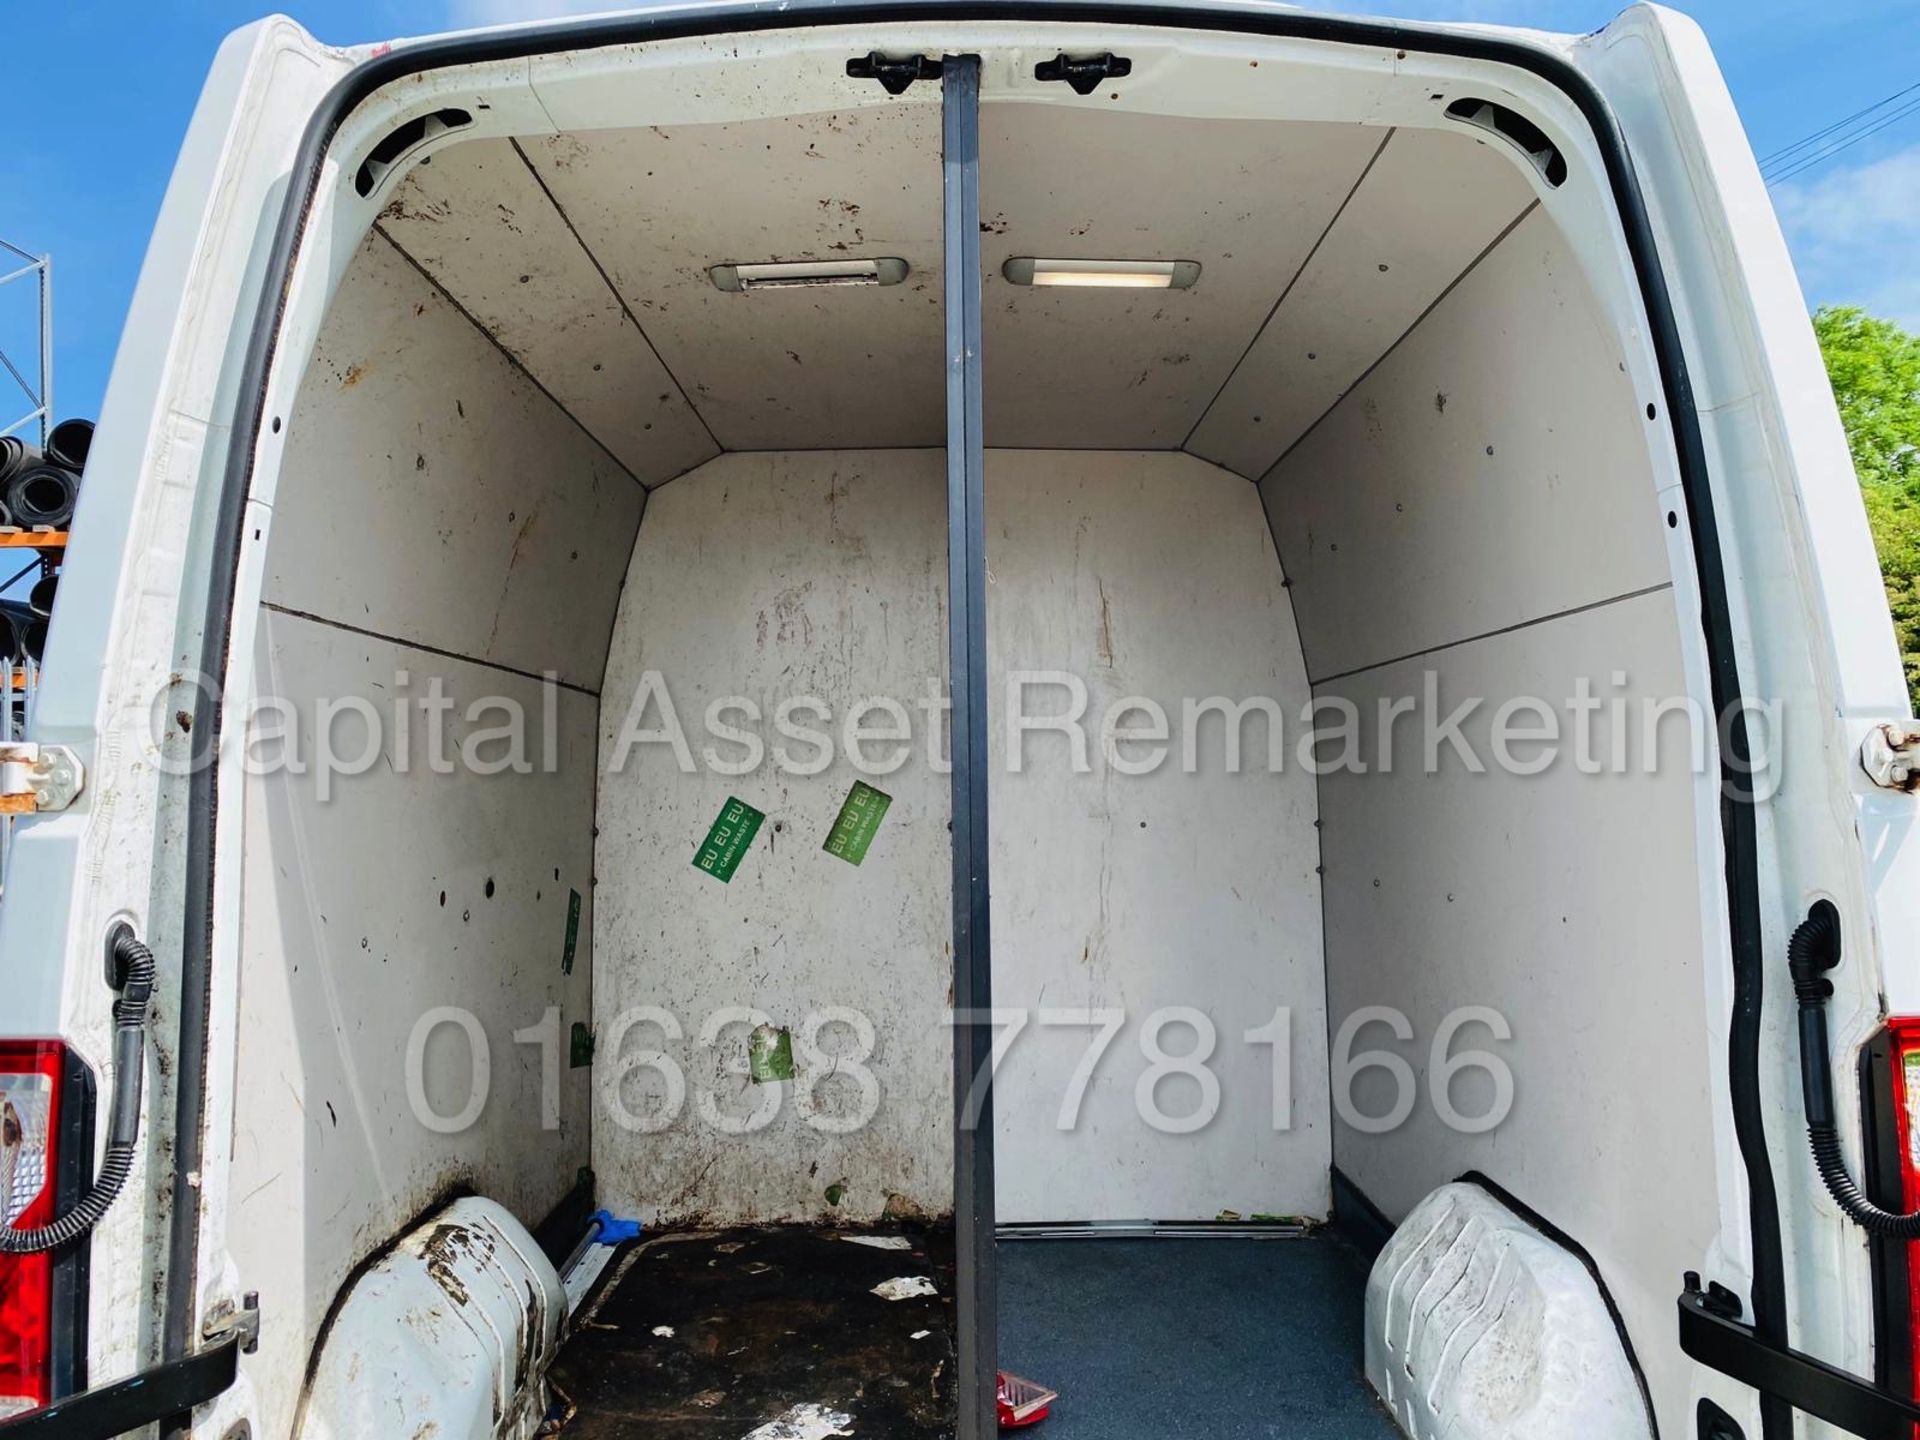 RENAULT MASTER LM35 *LWB HI-ROOF* (2016) '2.3 DCI - 110 BHP - 6 SPEED' **ONLY 36,000 MILES** - Image 30 of 33